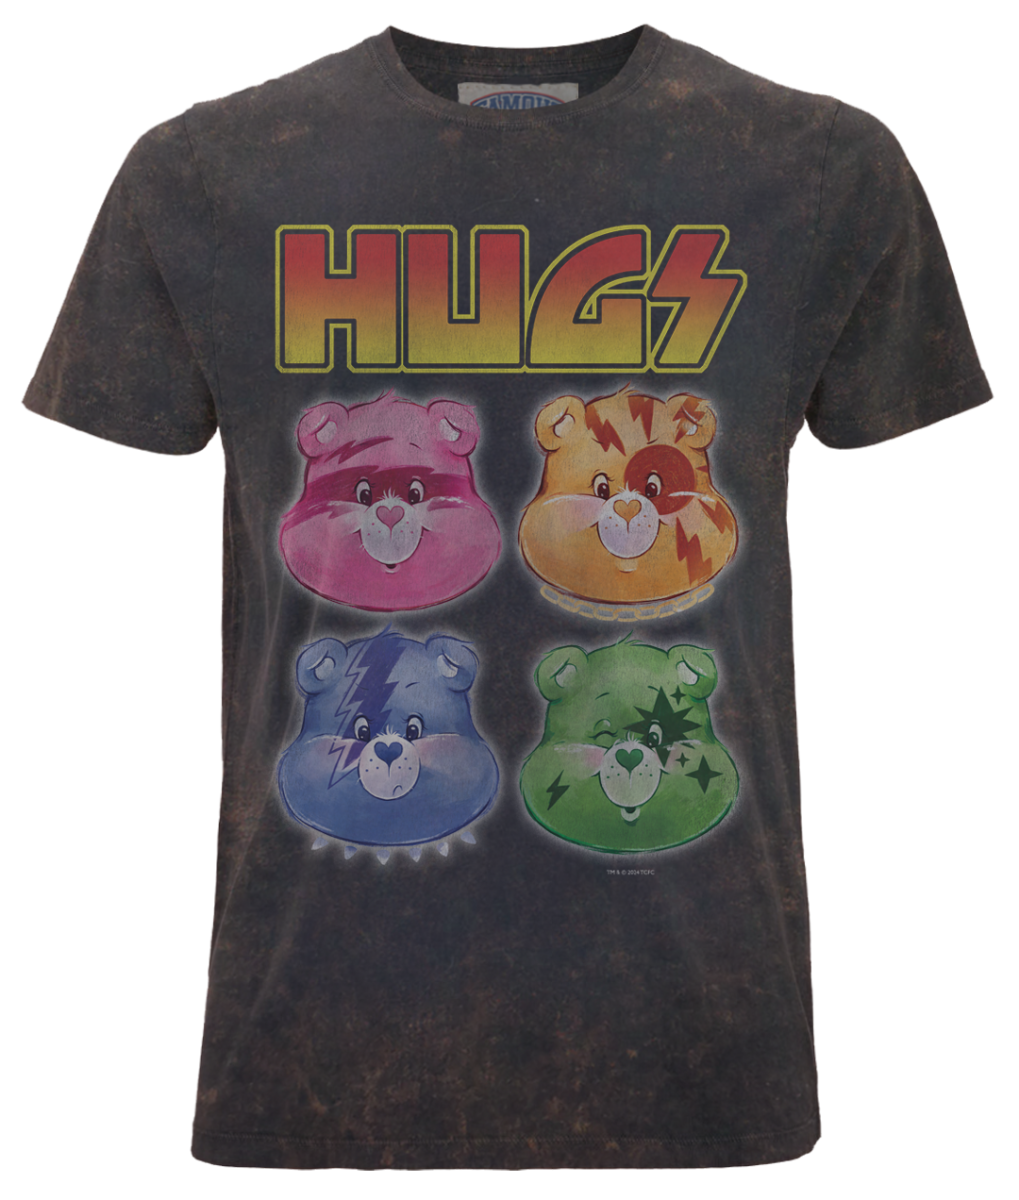 Exclusive Famous Forever vintage washed black short sleeve crew neck t-shirt featuring retro Carebears rock band design, good luck bear, funshine bear, grumpy bear and cheer bear rock star graphics with HUGS text. Full colour design with a vintage rock band style. Officially Licenced